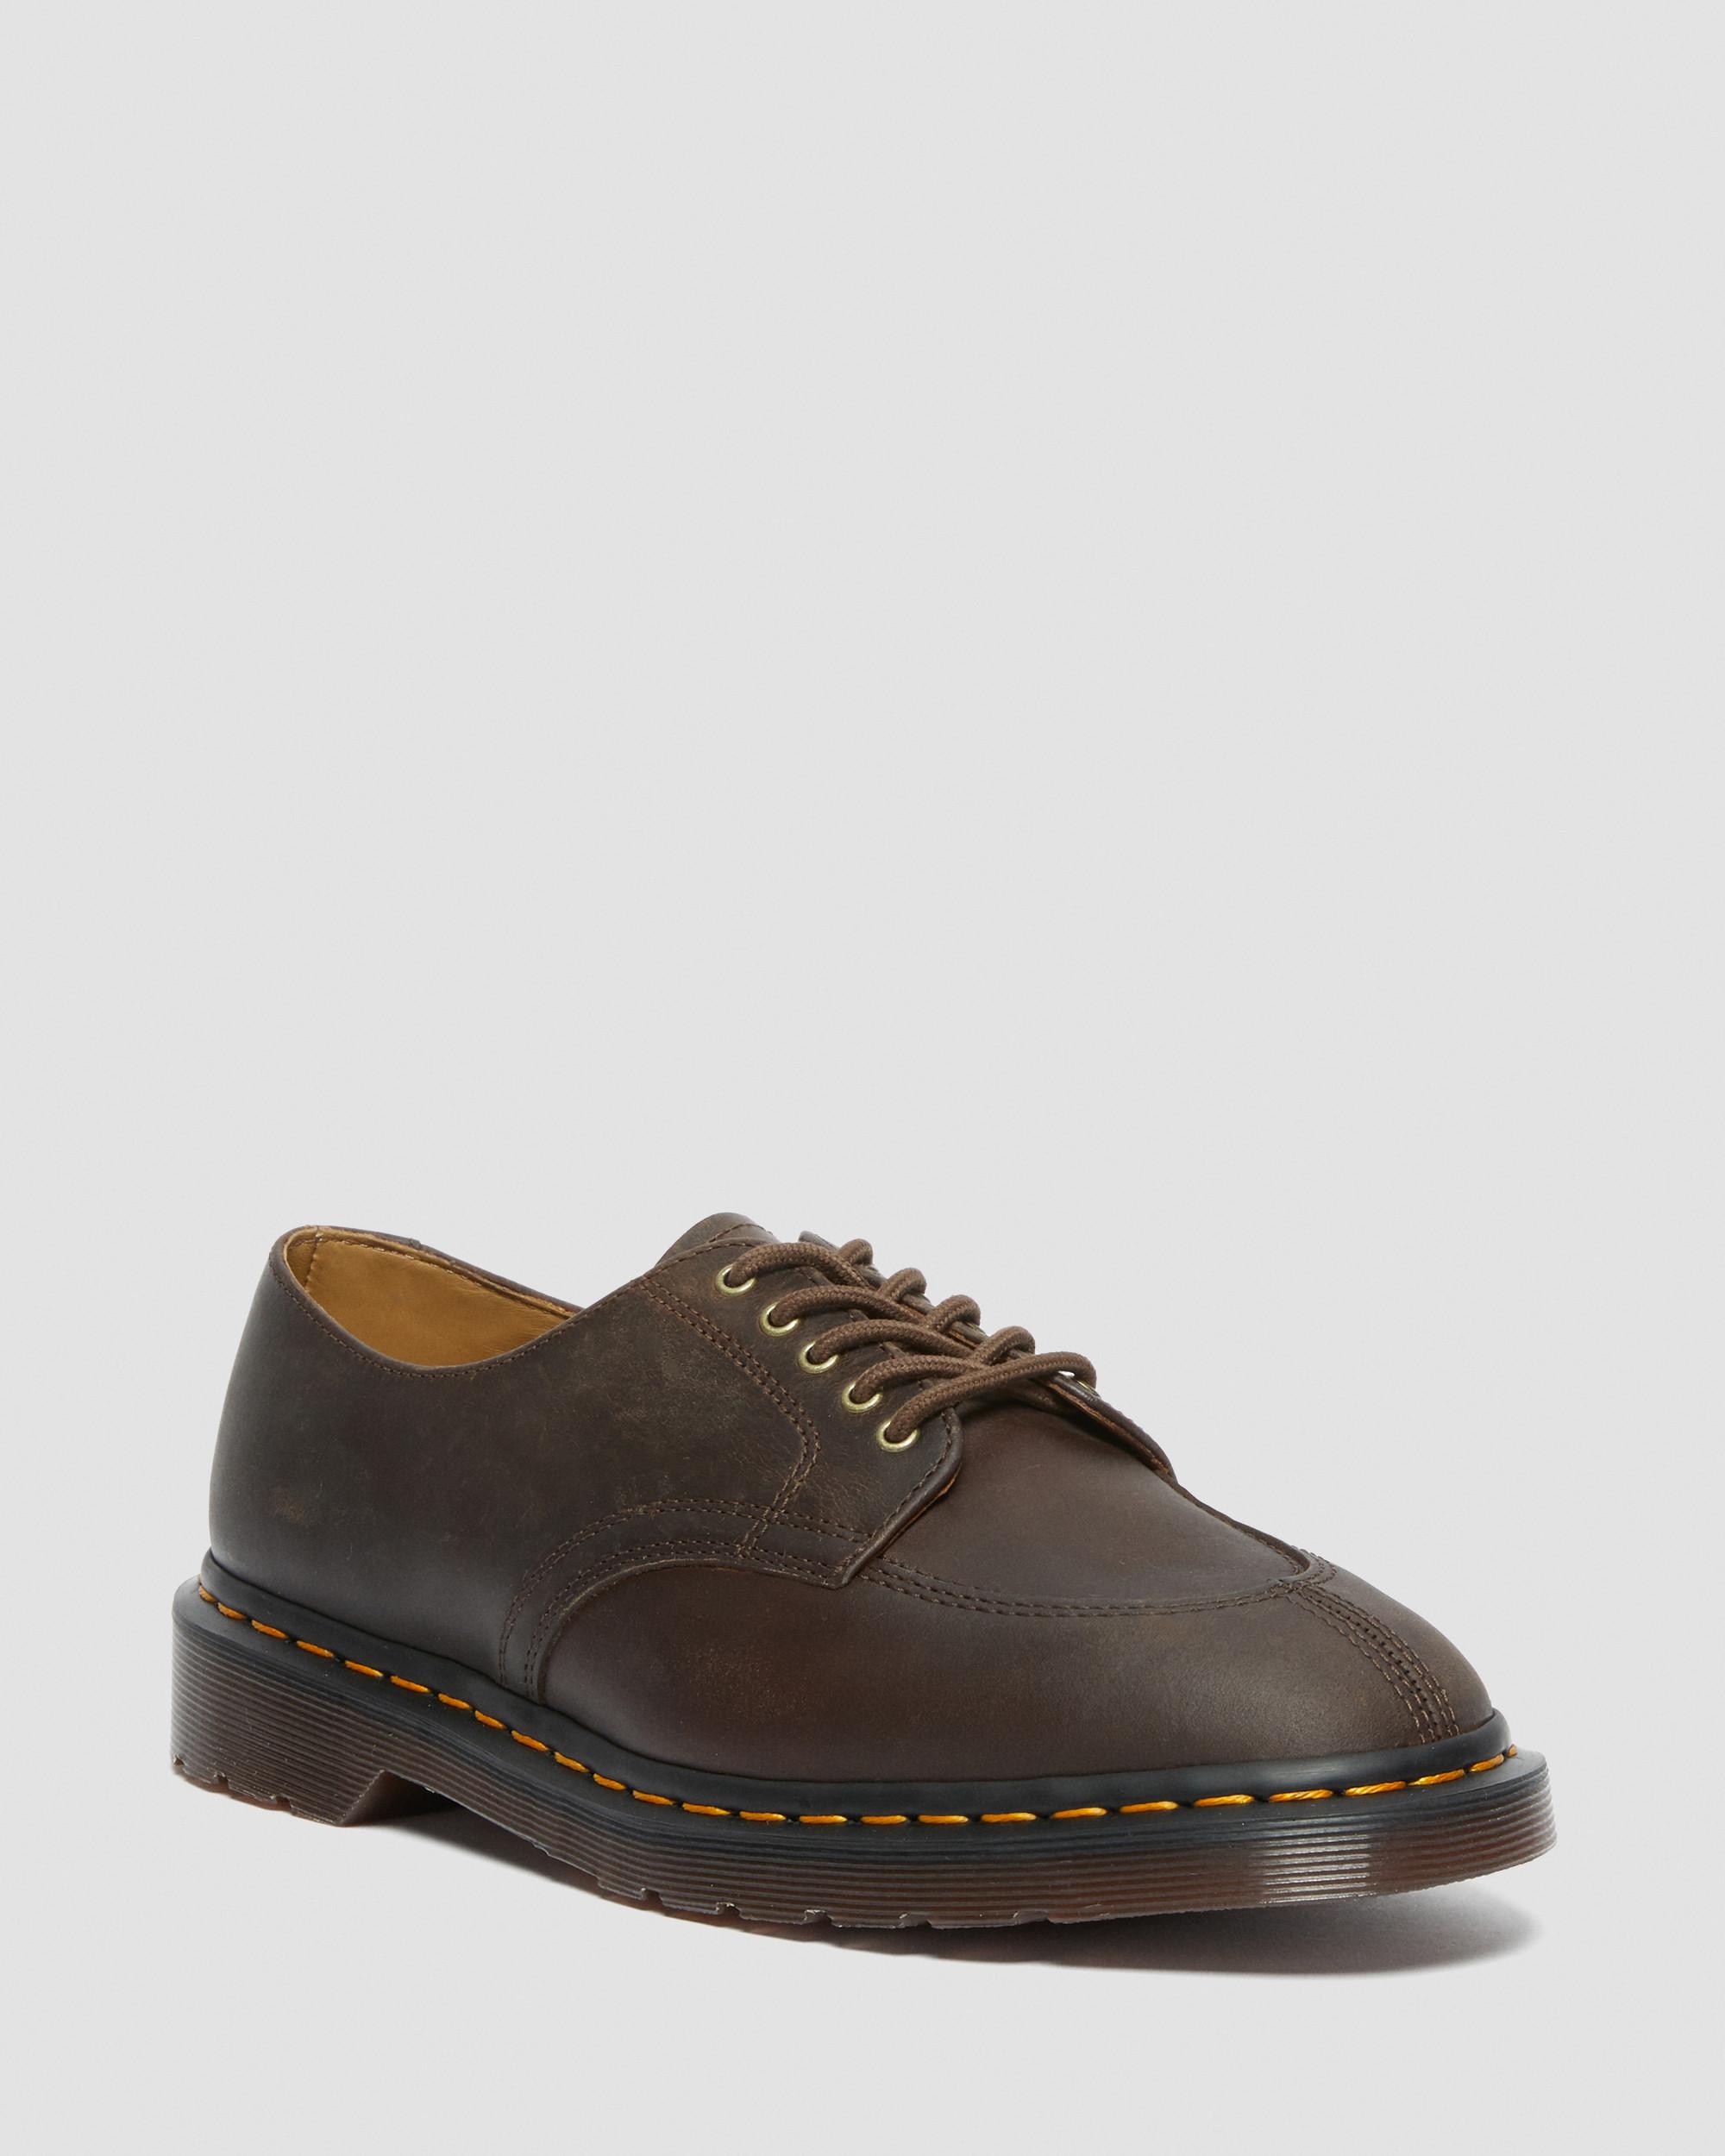 2046 Crazy Horse Leather Shoes in Dark Brown | Dr. Martens